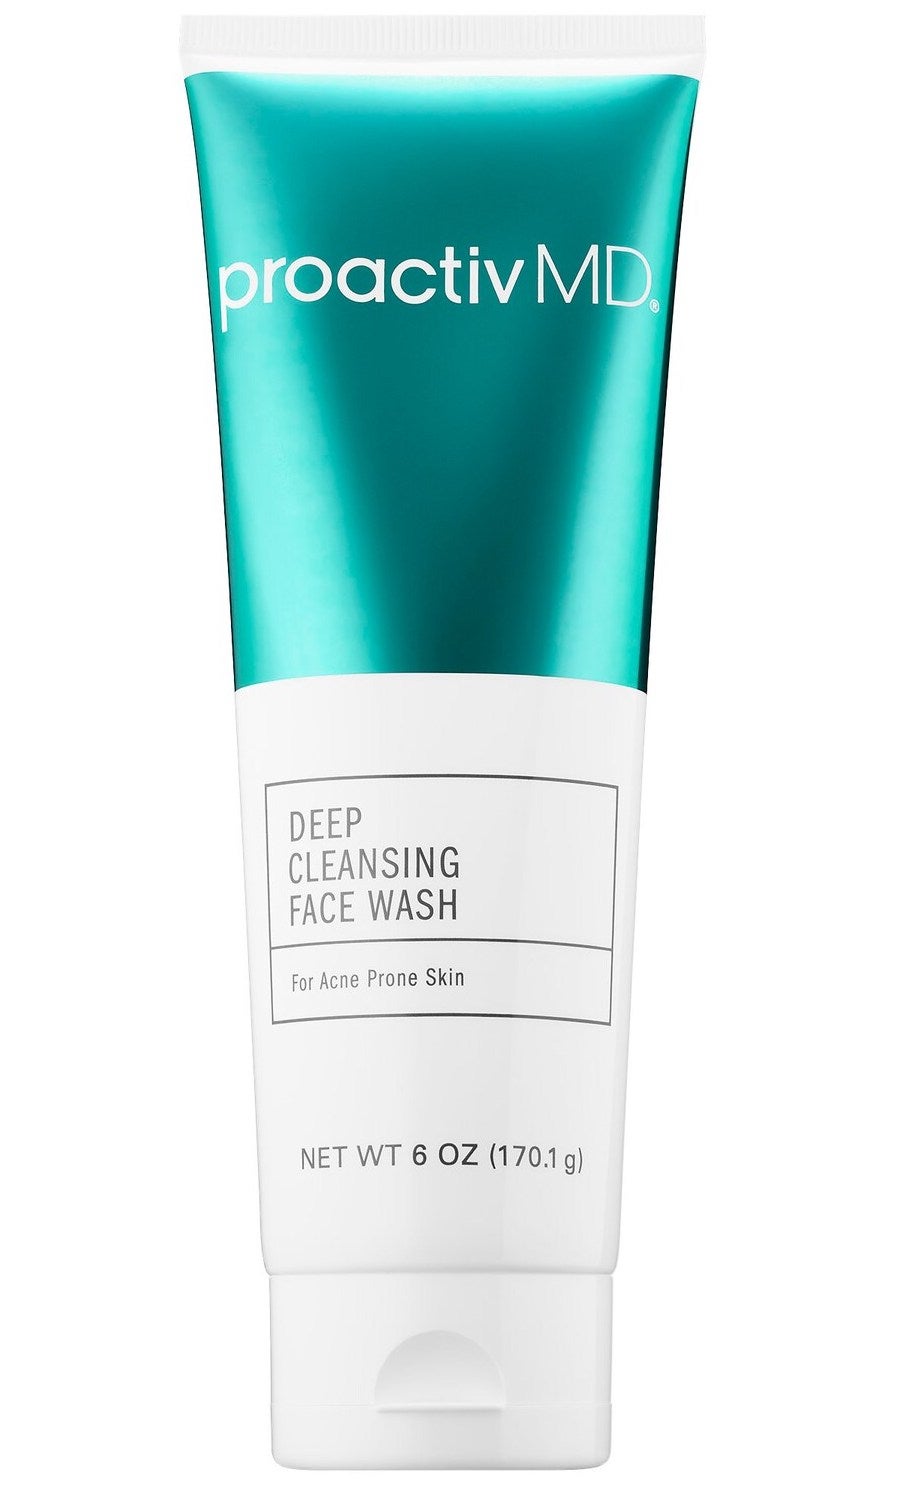 ProactivMD Deep Cleansing Face Wash